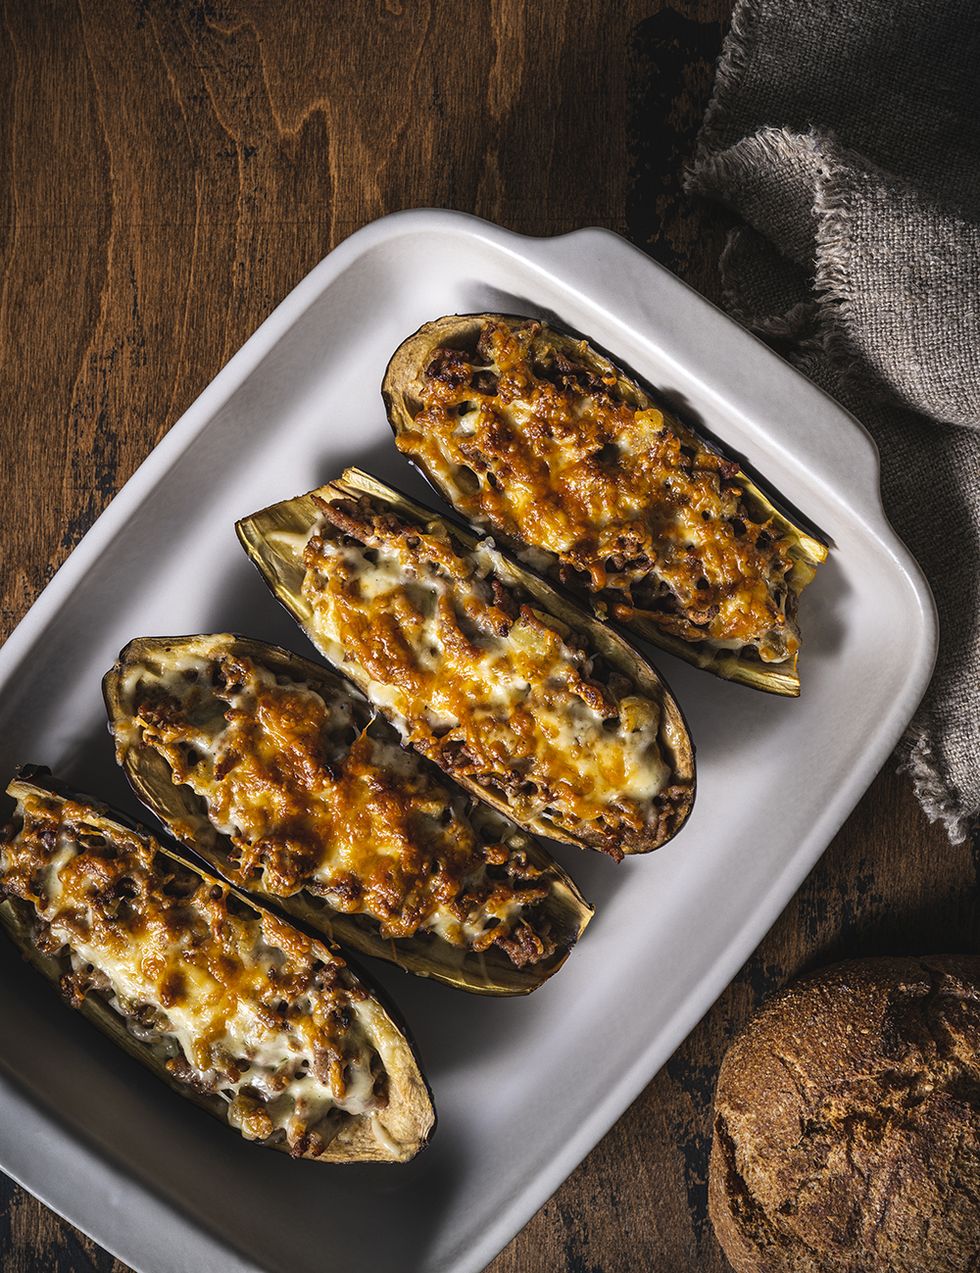 stuffed eggplants with minced meat recipe italian aubergine parmigiana or eggplant parmesan on rustic wood table in an oven tray